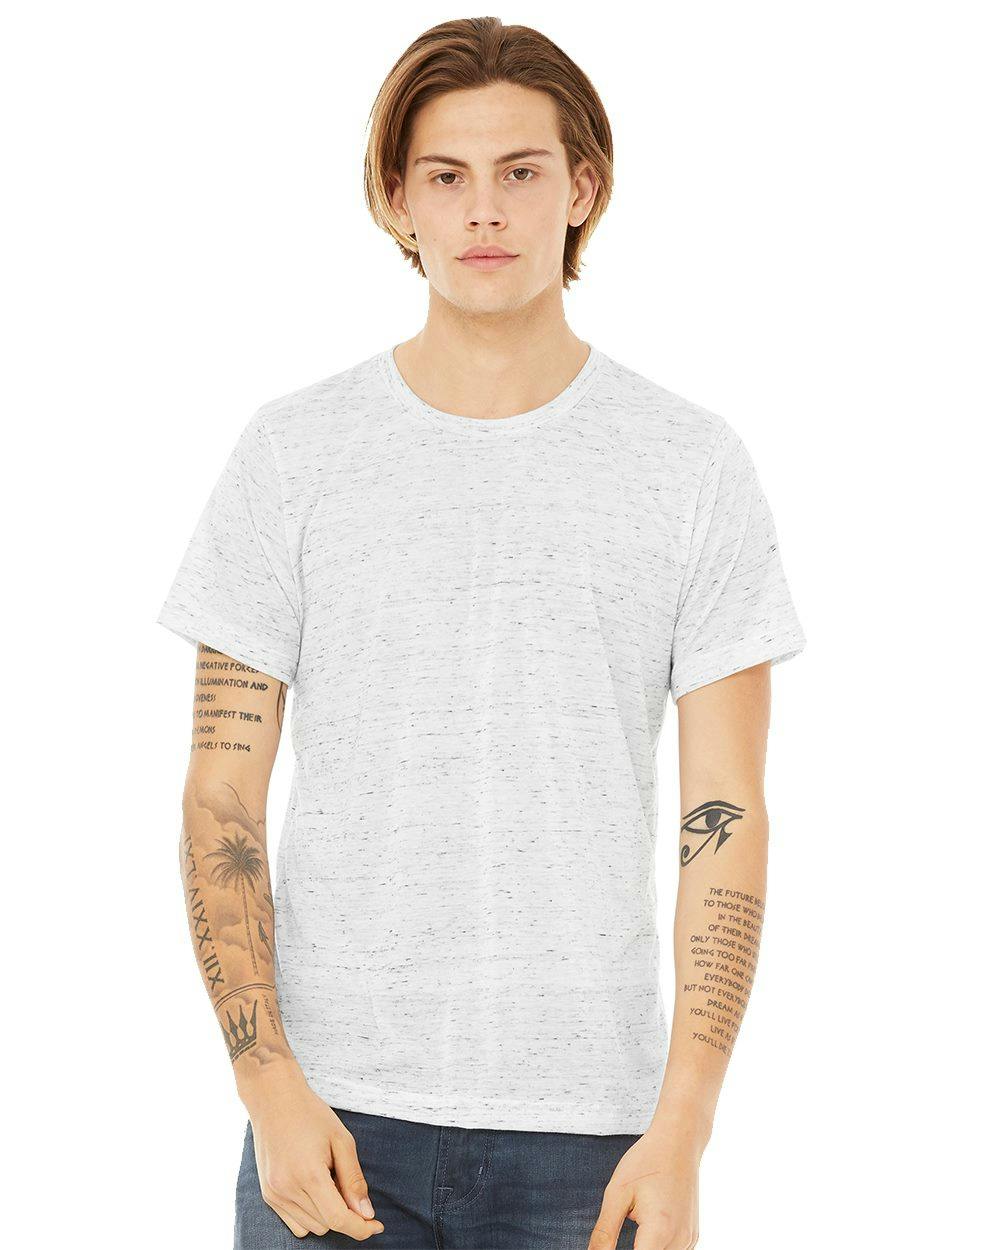 Image for Texture Tee - 3650